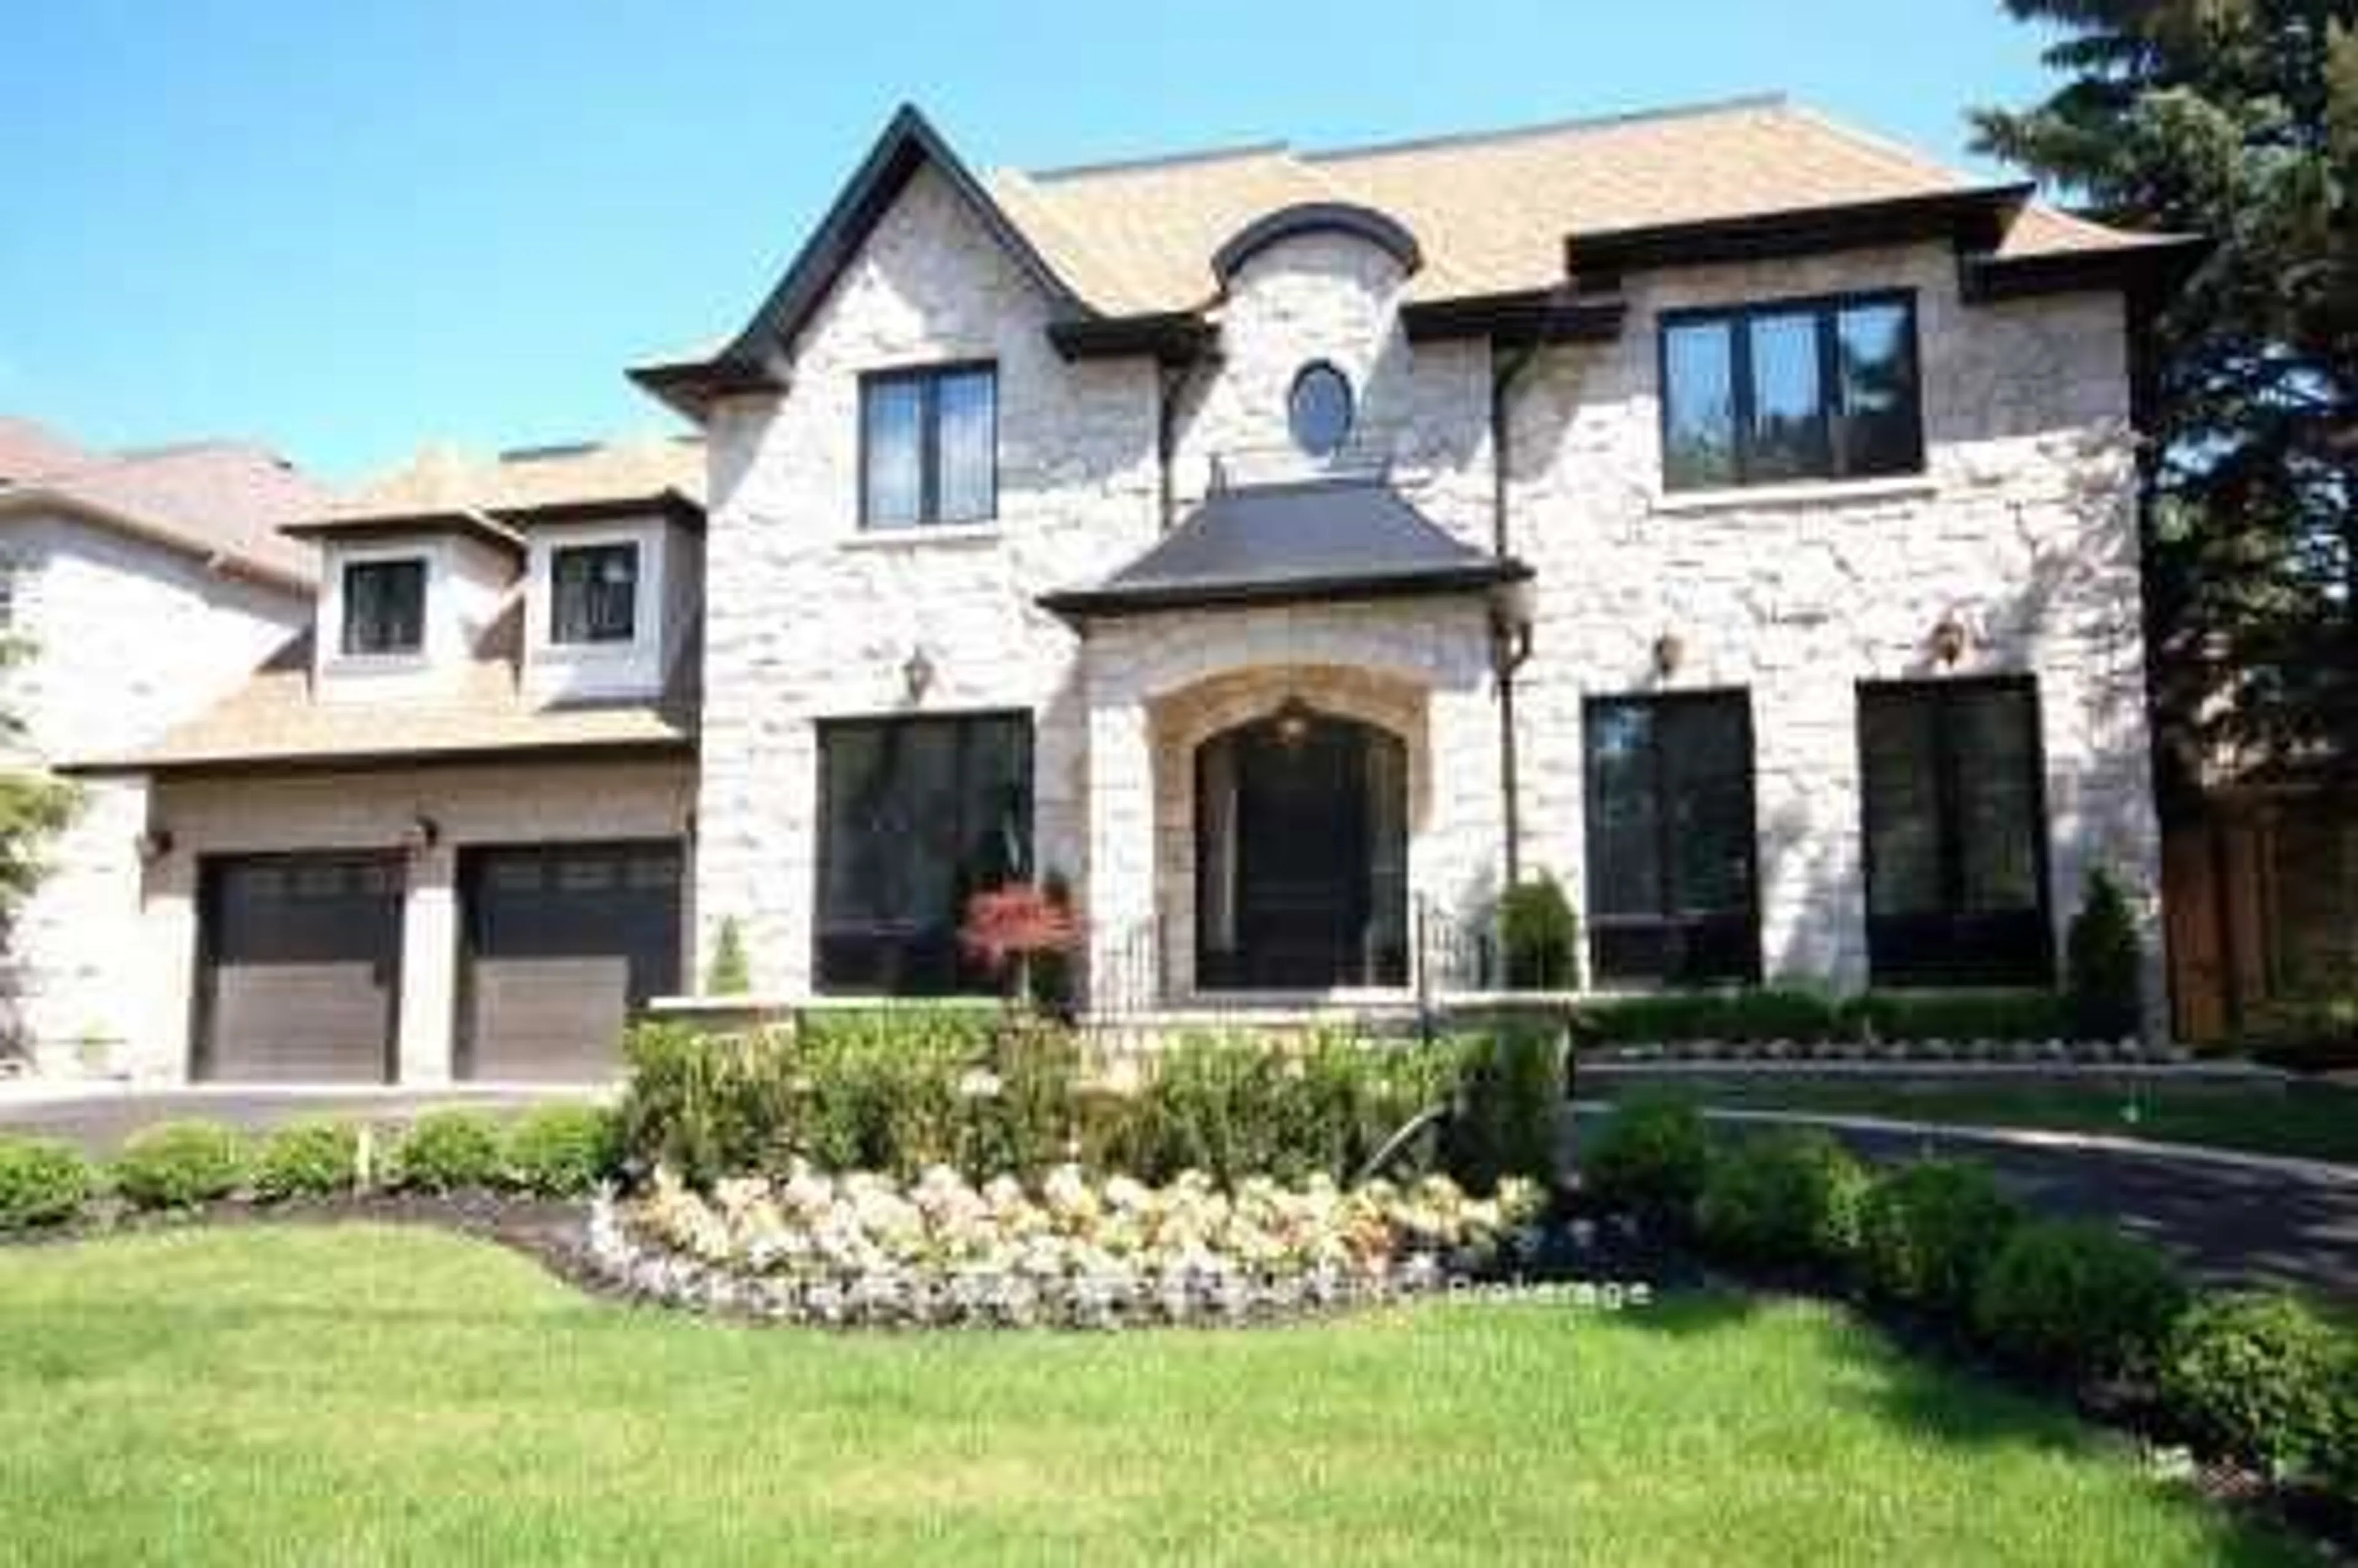 Home with brick exterior material for 82 York Rd, Toronto Ontario M2L 1H8